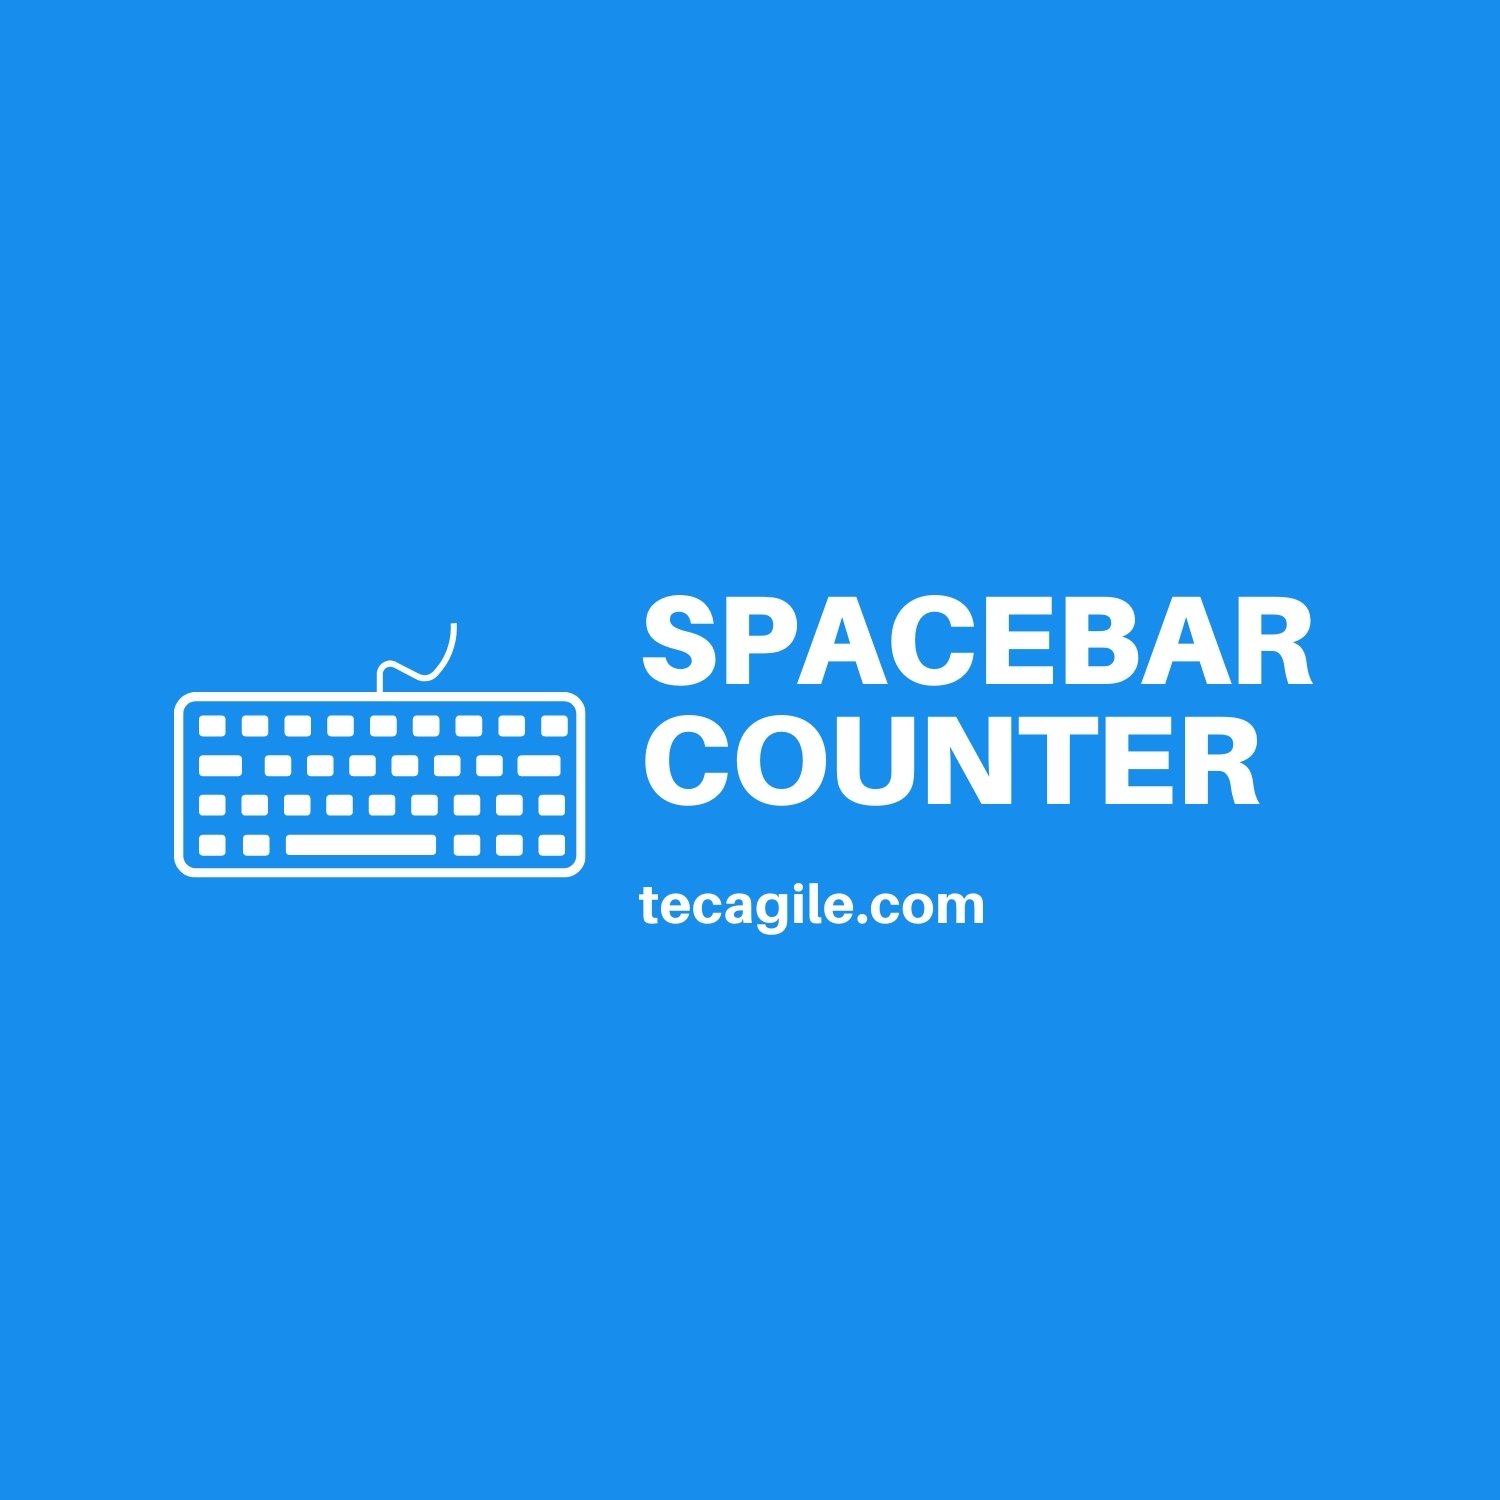 Spacebar Counter & Test Online With & Without Timer Option